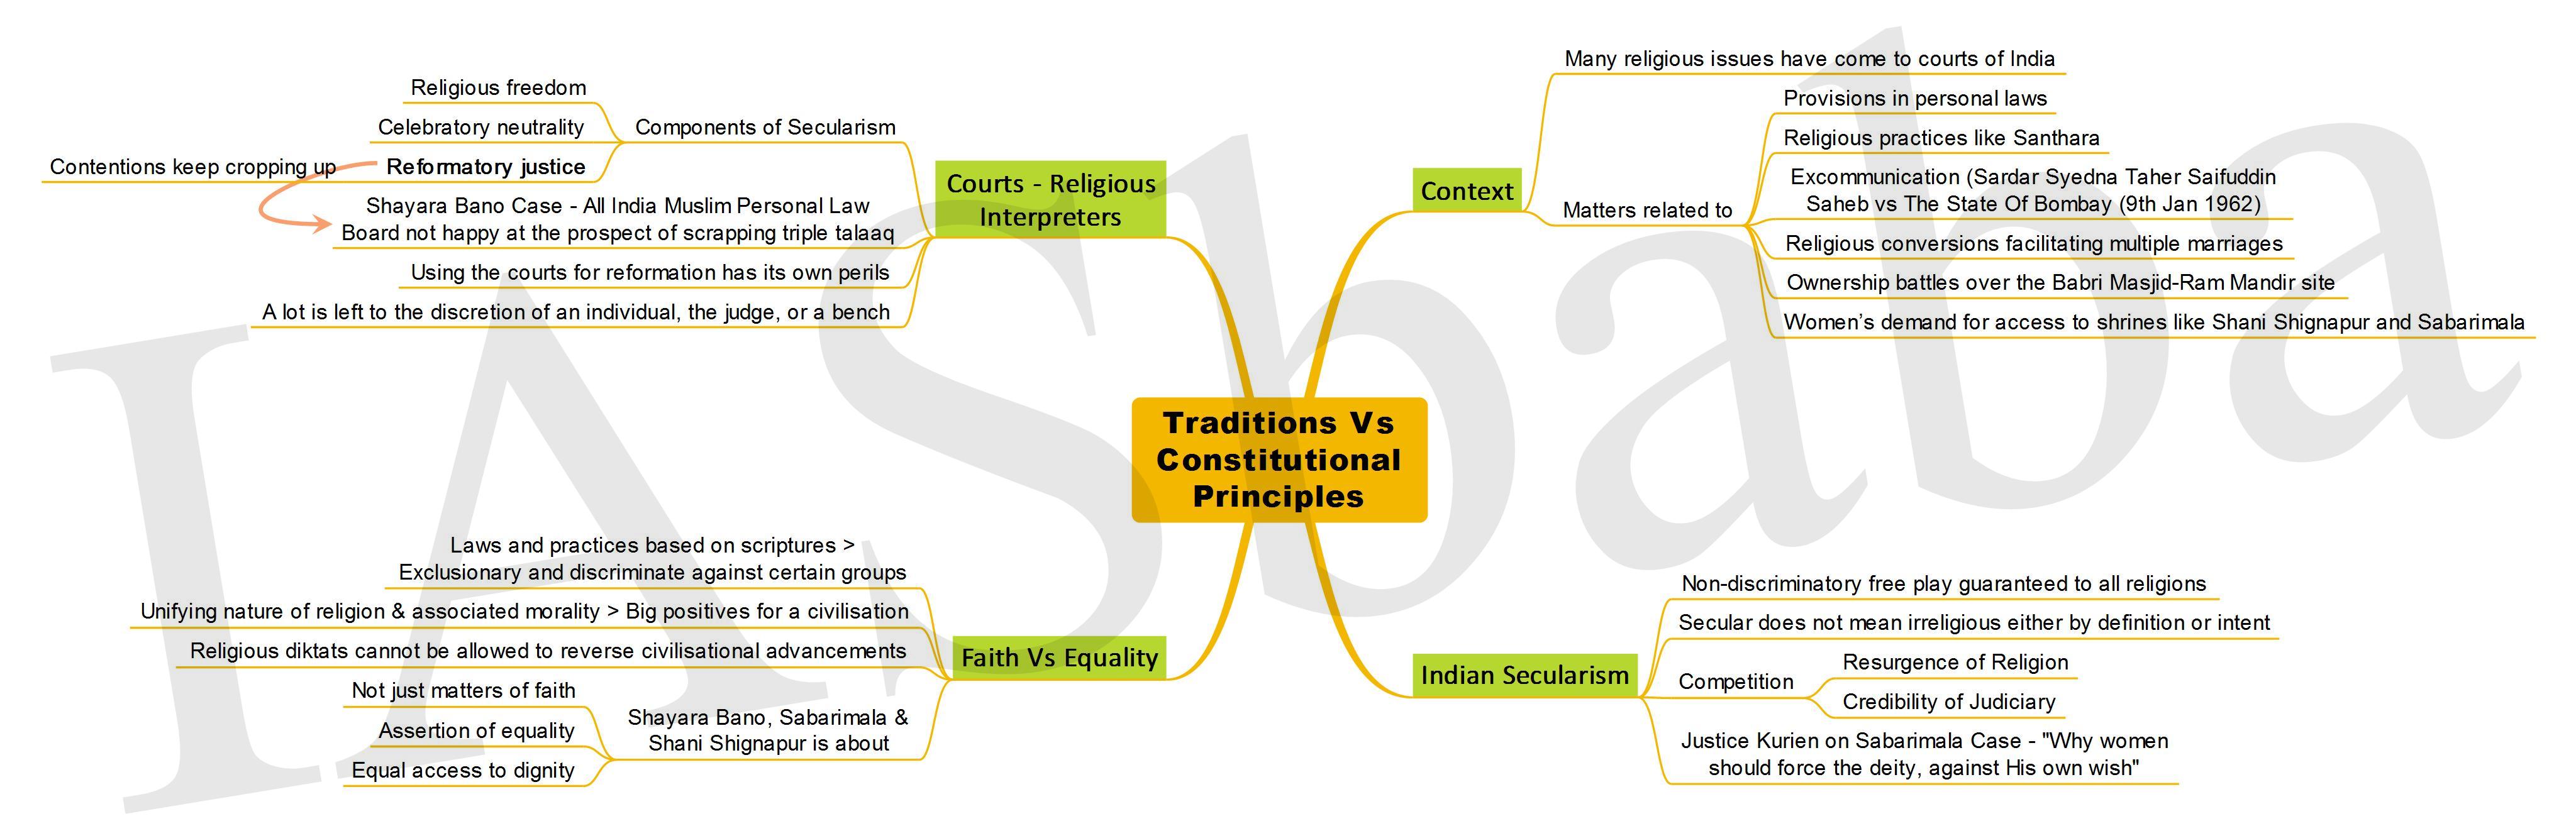 Traditions Vs Constitutional Principles-IASbaba